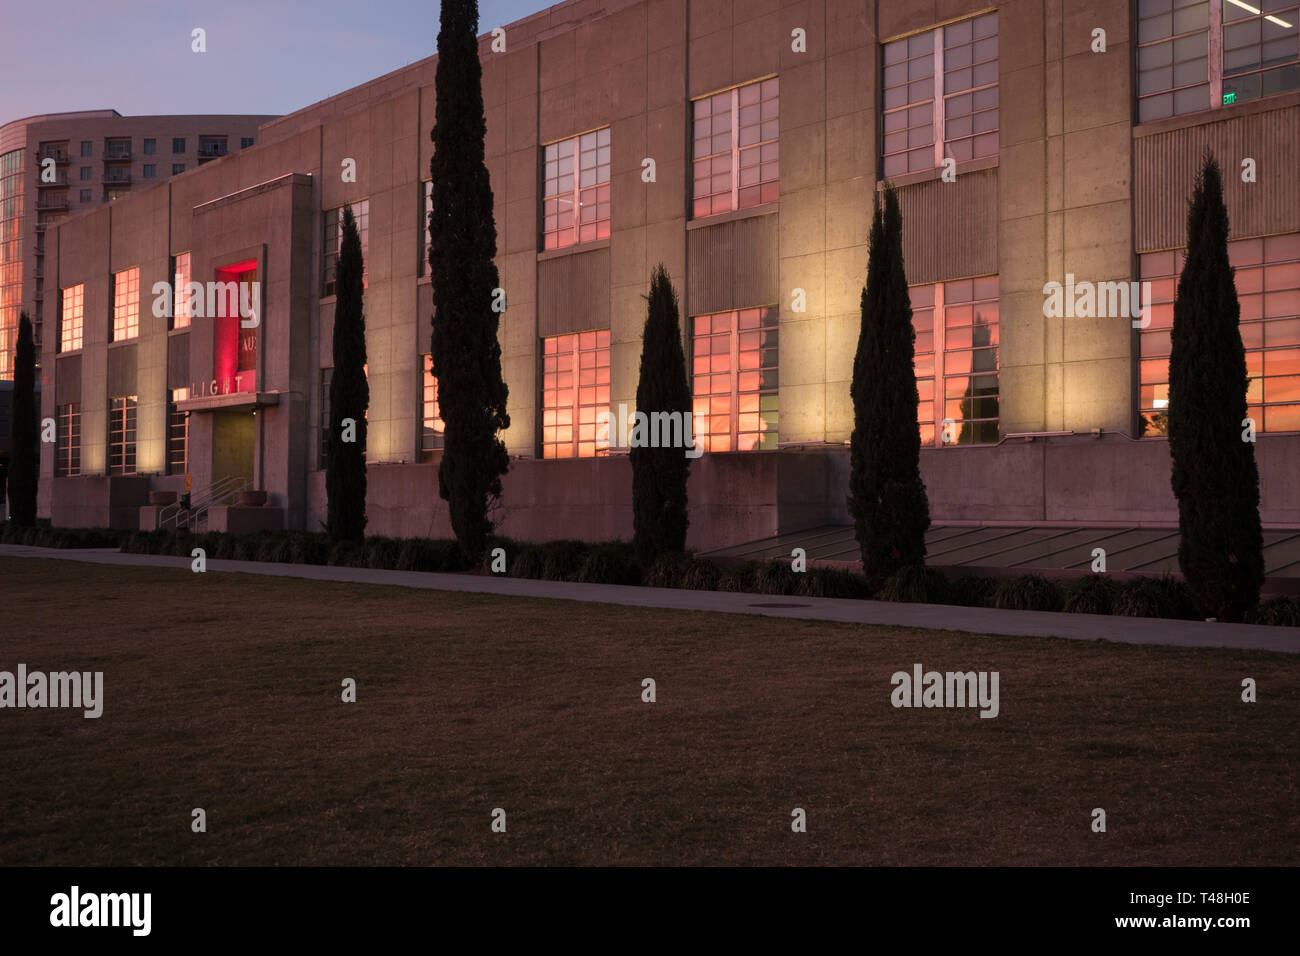 Sunset at the Seaholm Power Plant in Austin, Texas Stock Photo